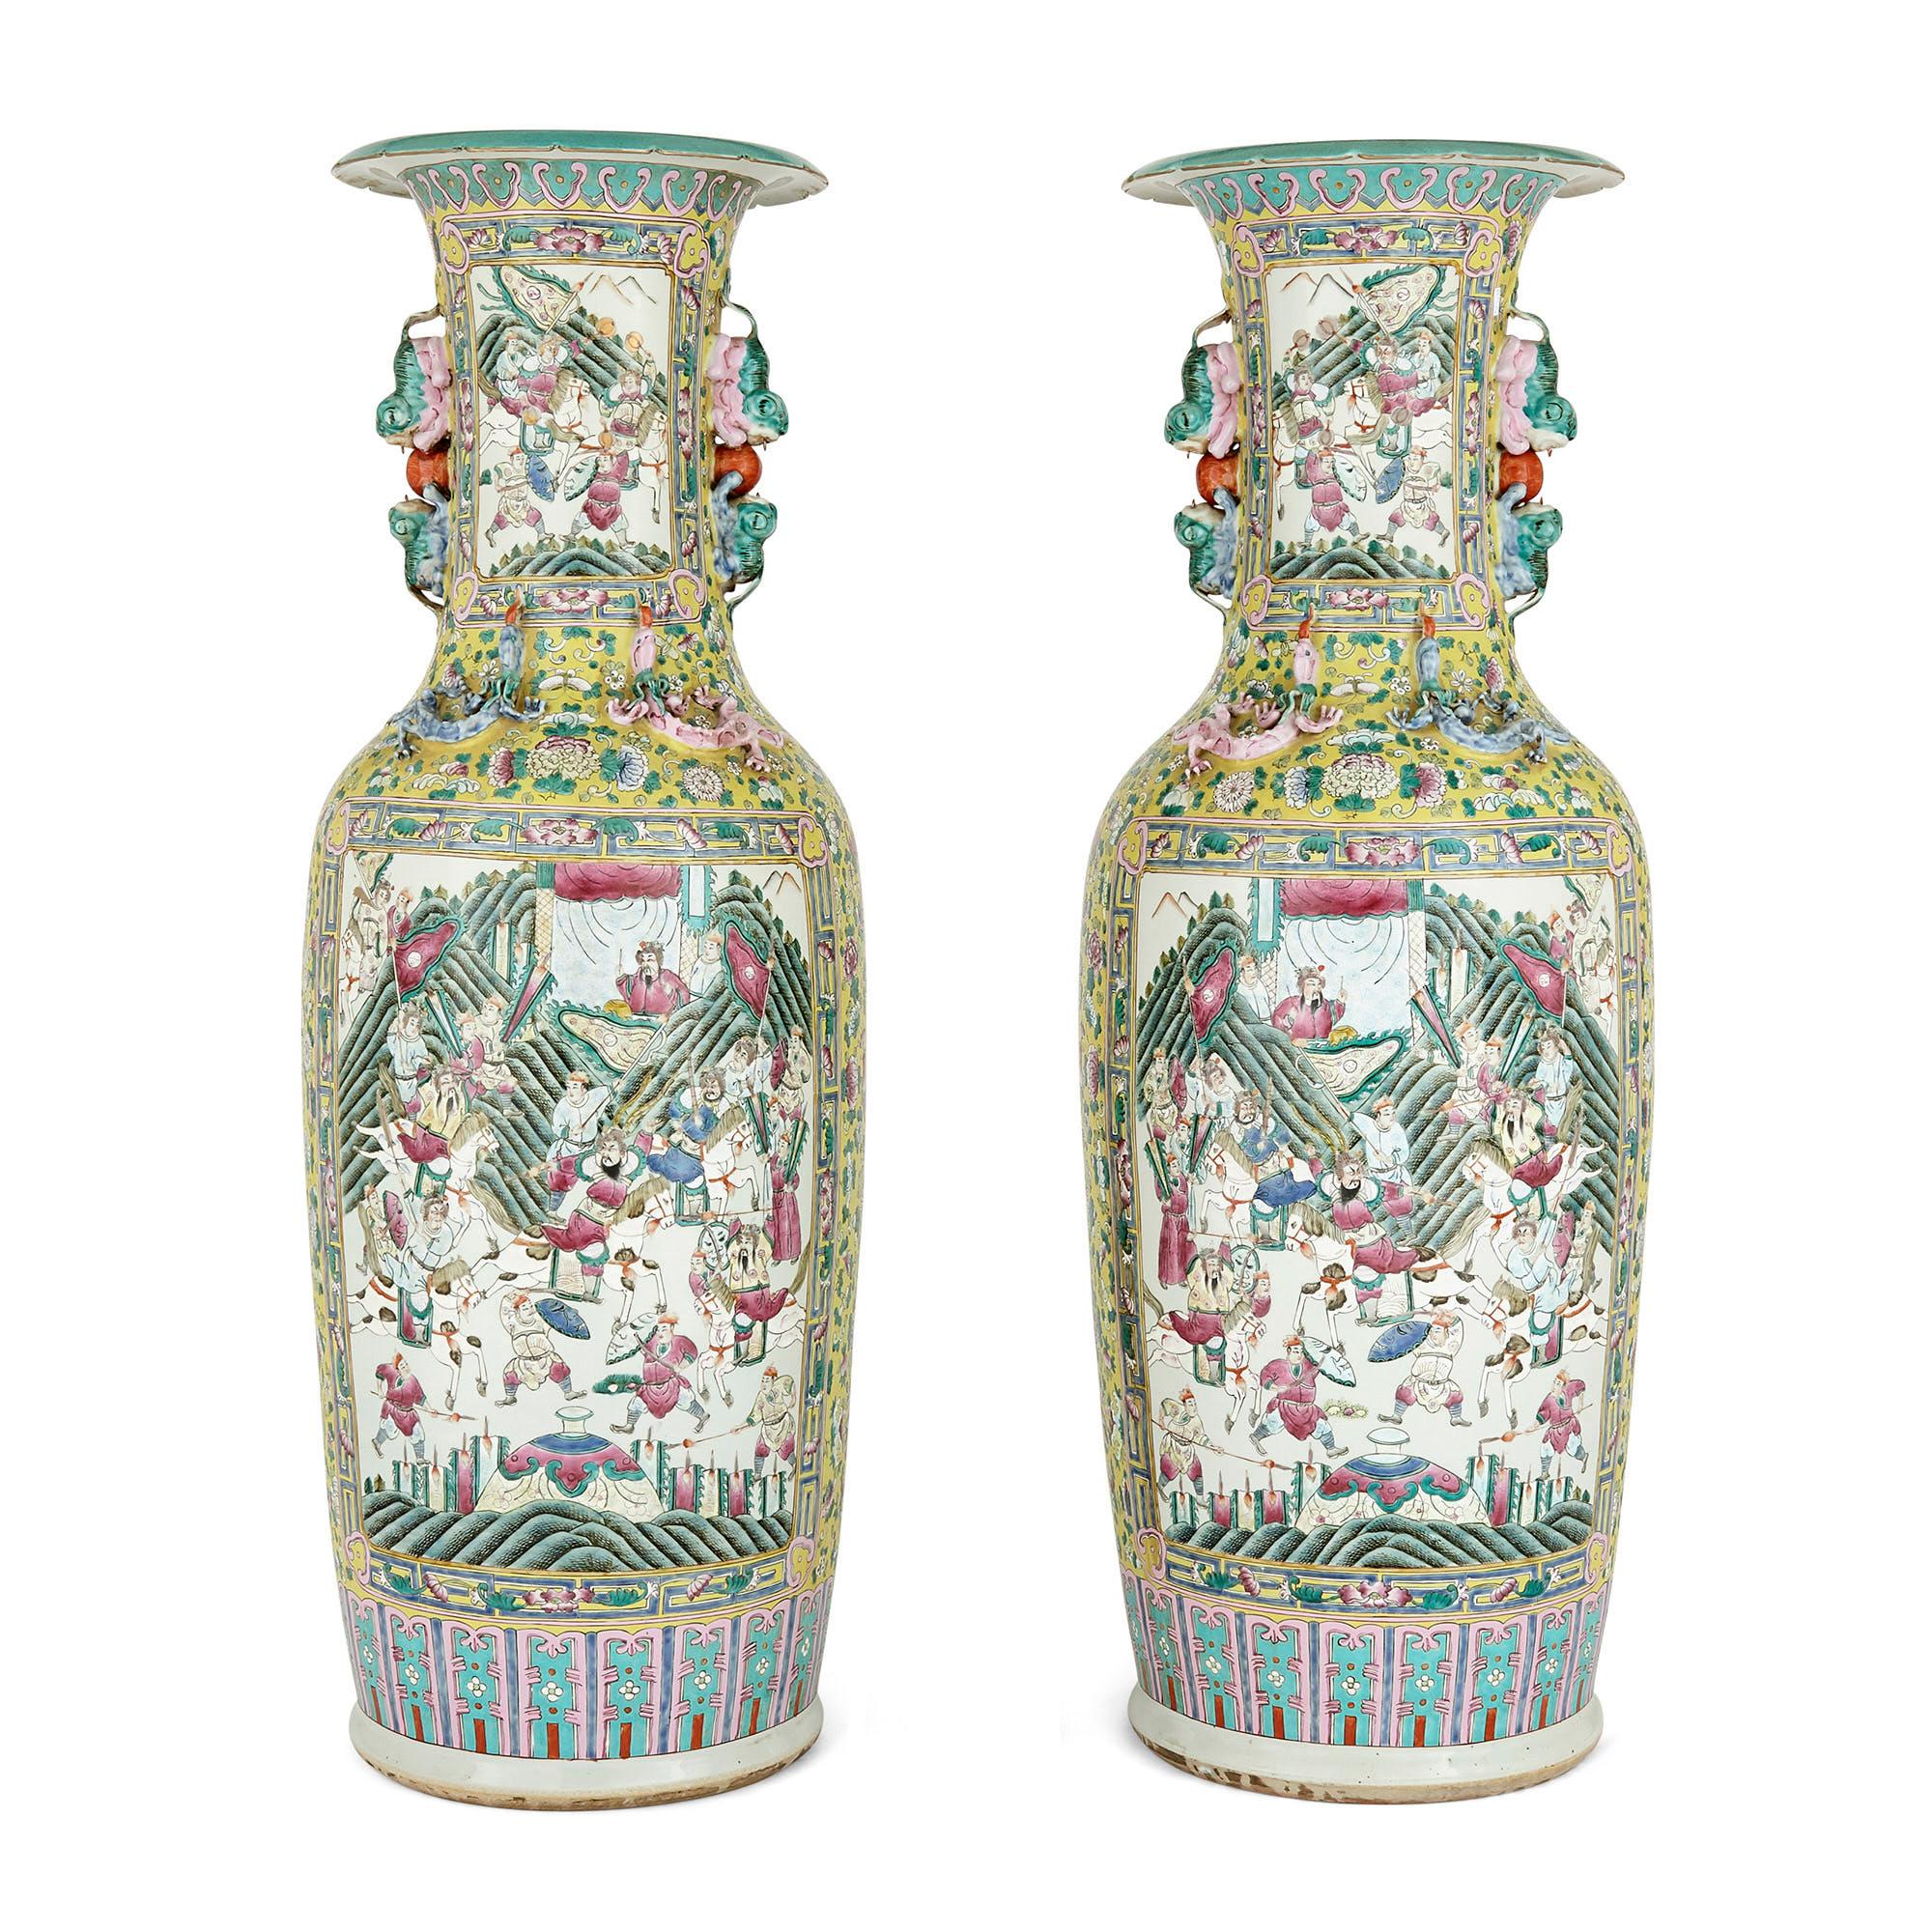 Pair of large Canton style Chinese porcelain vases
Chinese, early 20th century
Measures: Height 123cm, diameter 42cm

These large and impressive Chinese famille jaune porcelain vases are elaborately decorated with various Chinese motifs. Each